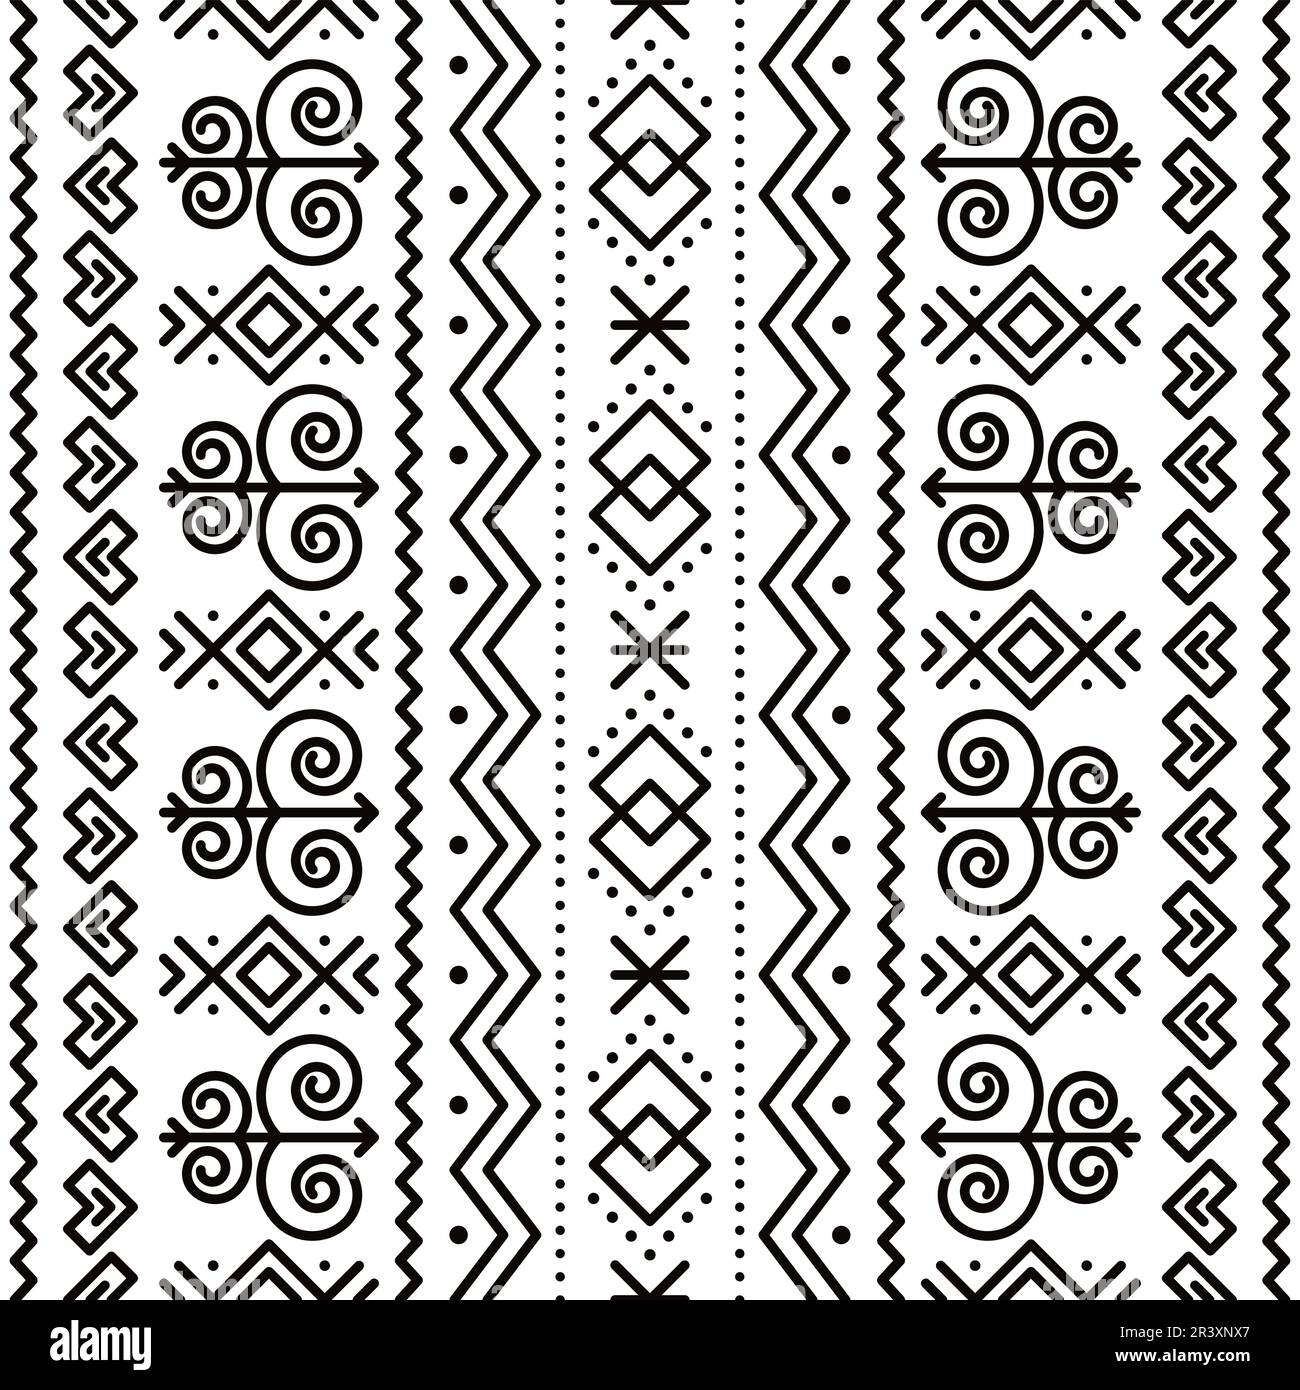 Slovak tribal folk art vector seamless geometric pattern with geometric motif- vertical deisgn inspired by traditional painted art from village Cicman Stock Vector